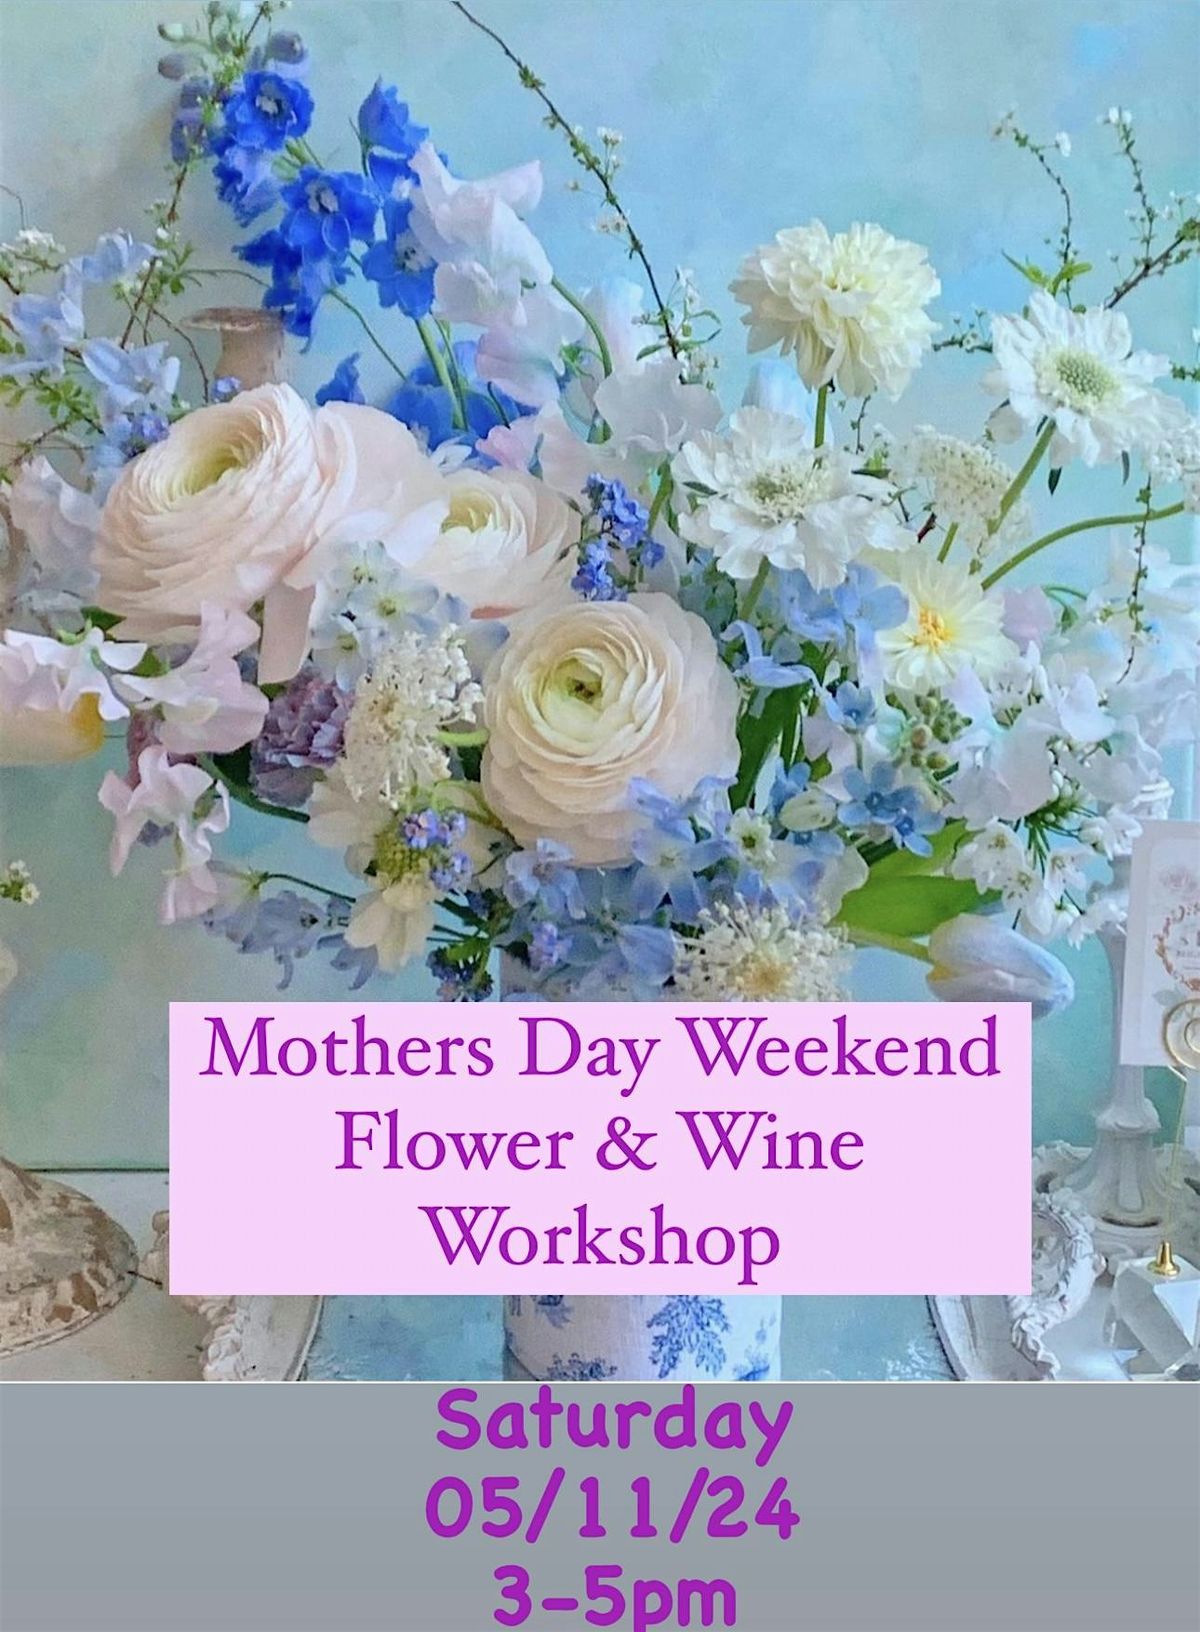 European Flower Workshop! Glass of wine and appetizers included.